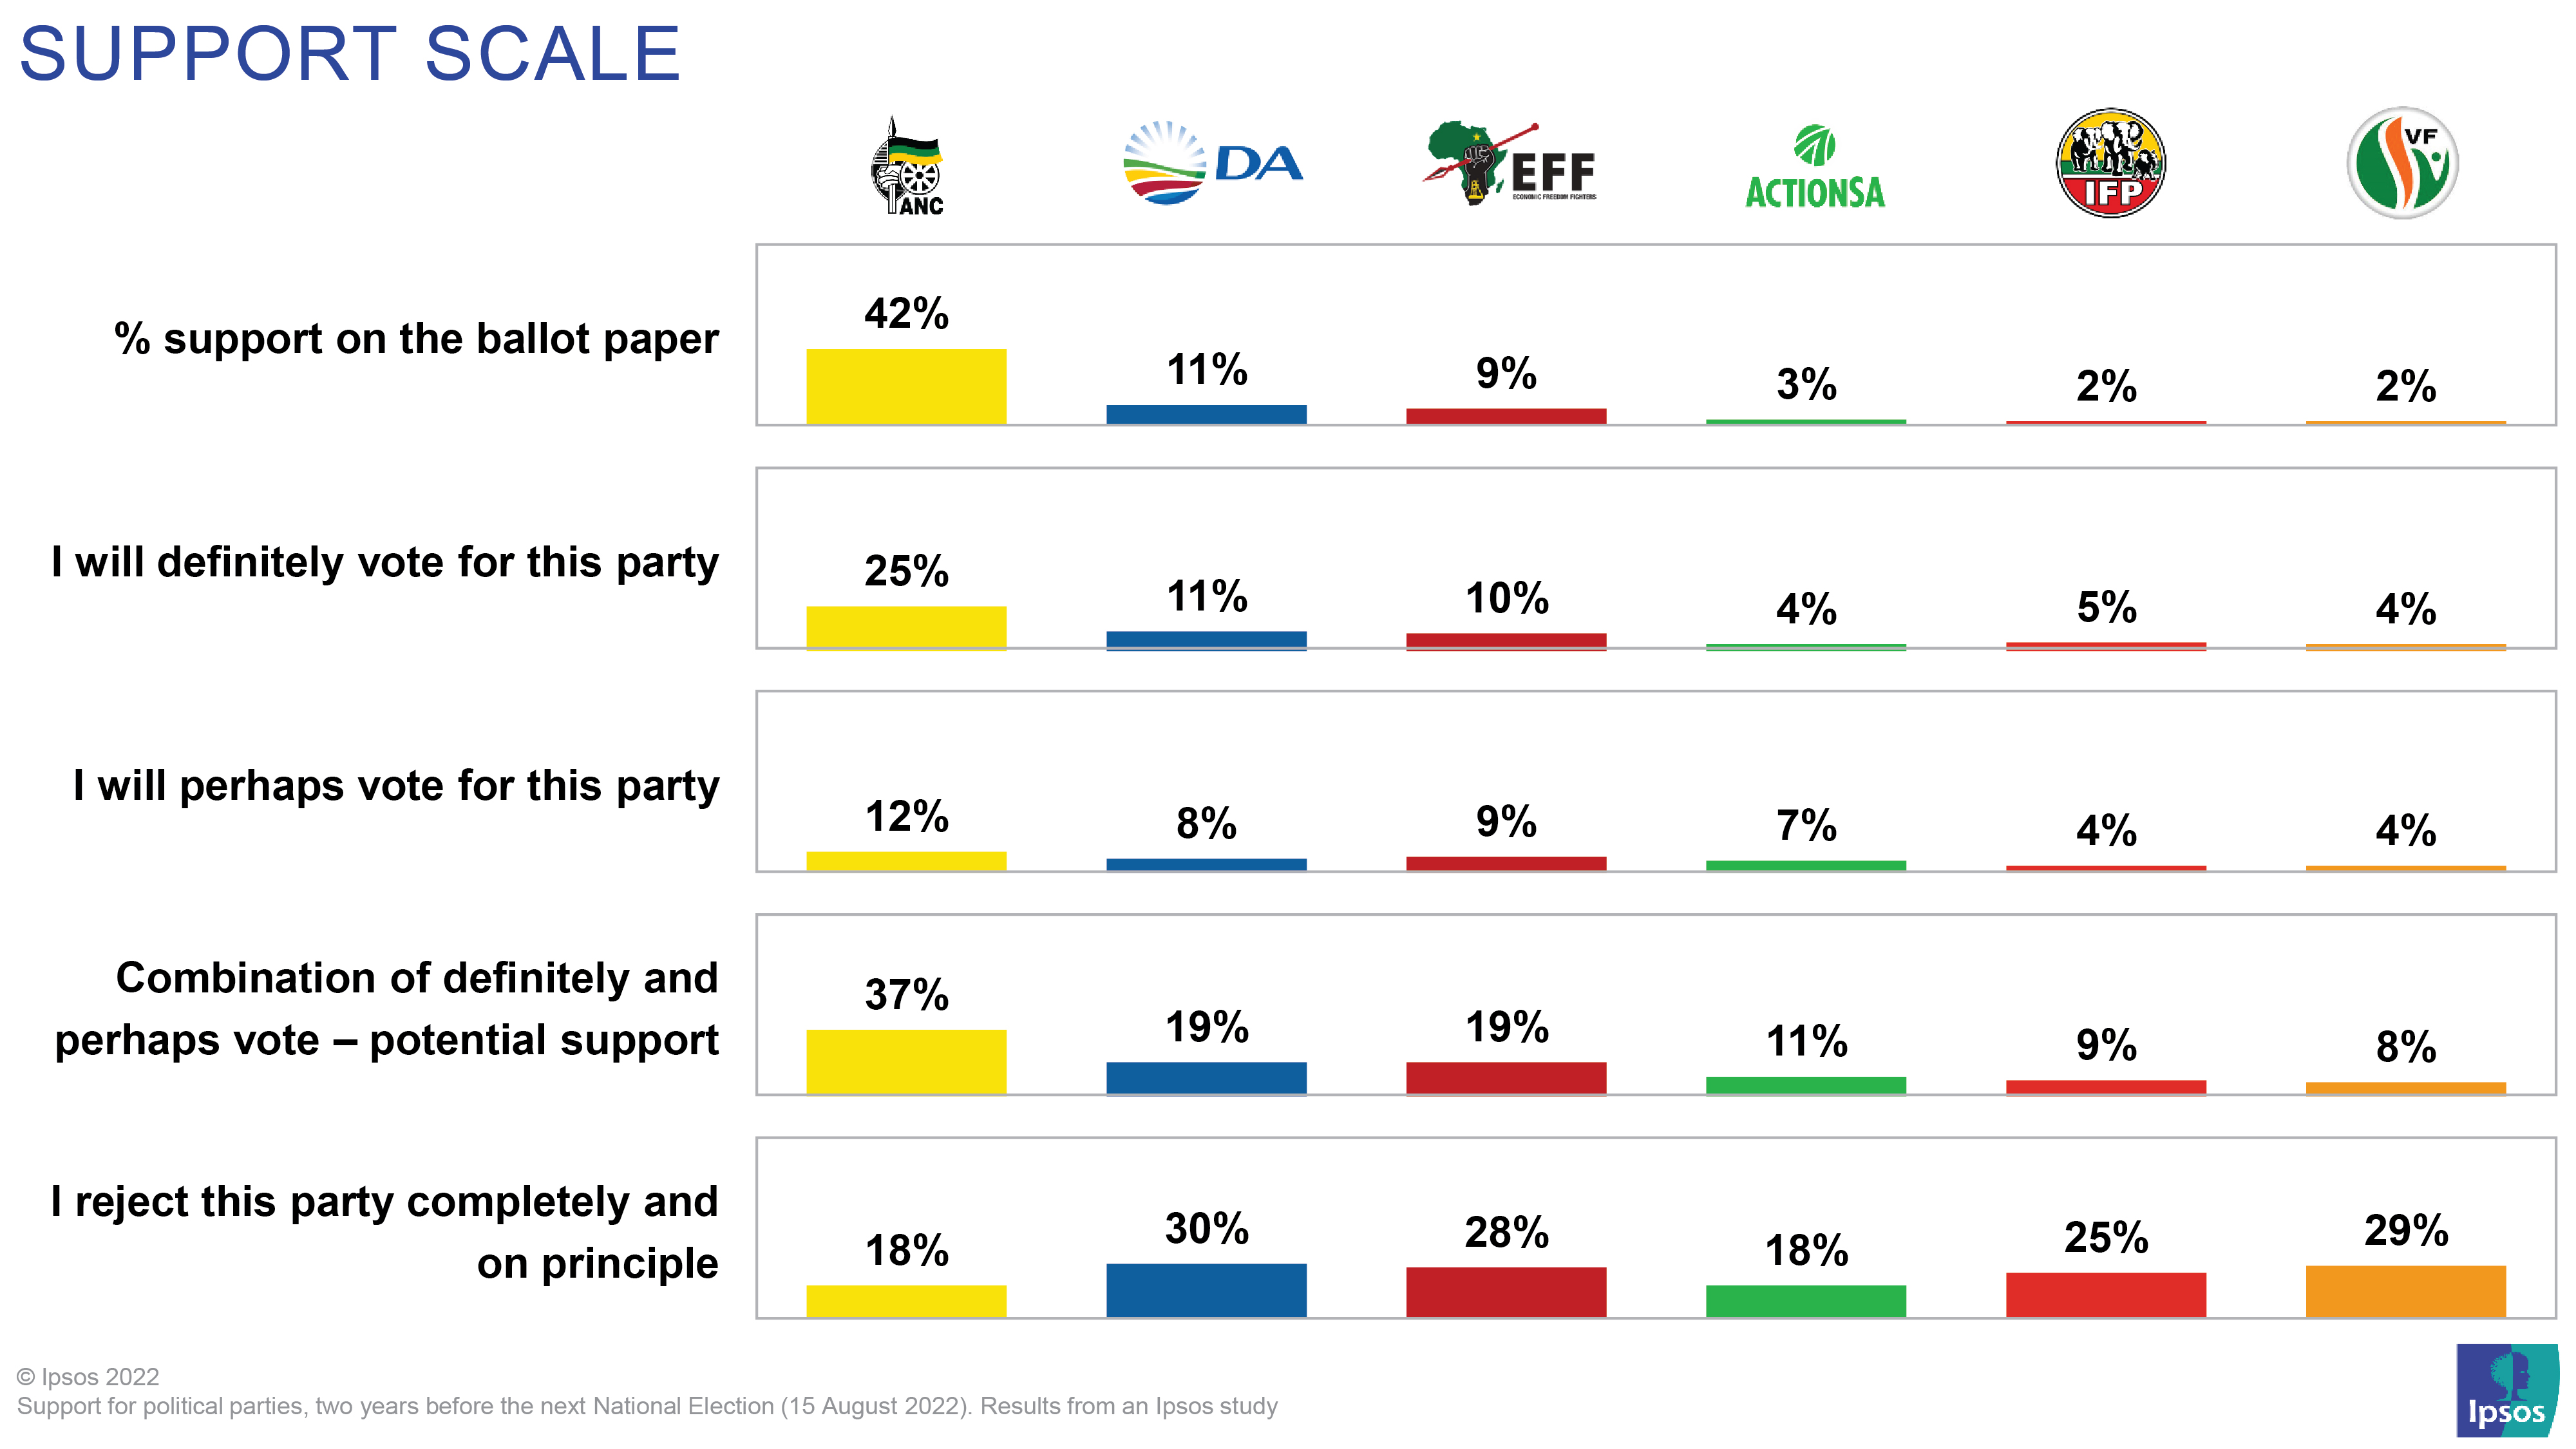 Support for political parties, two years before the next National Election in South Africa